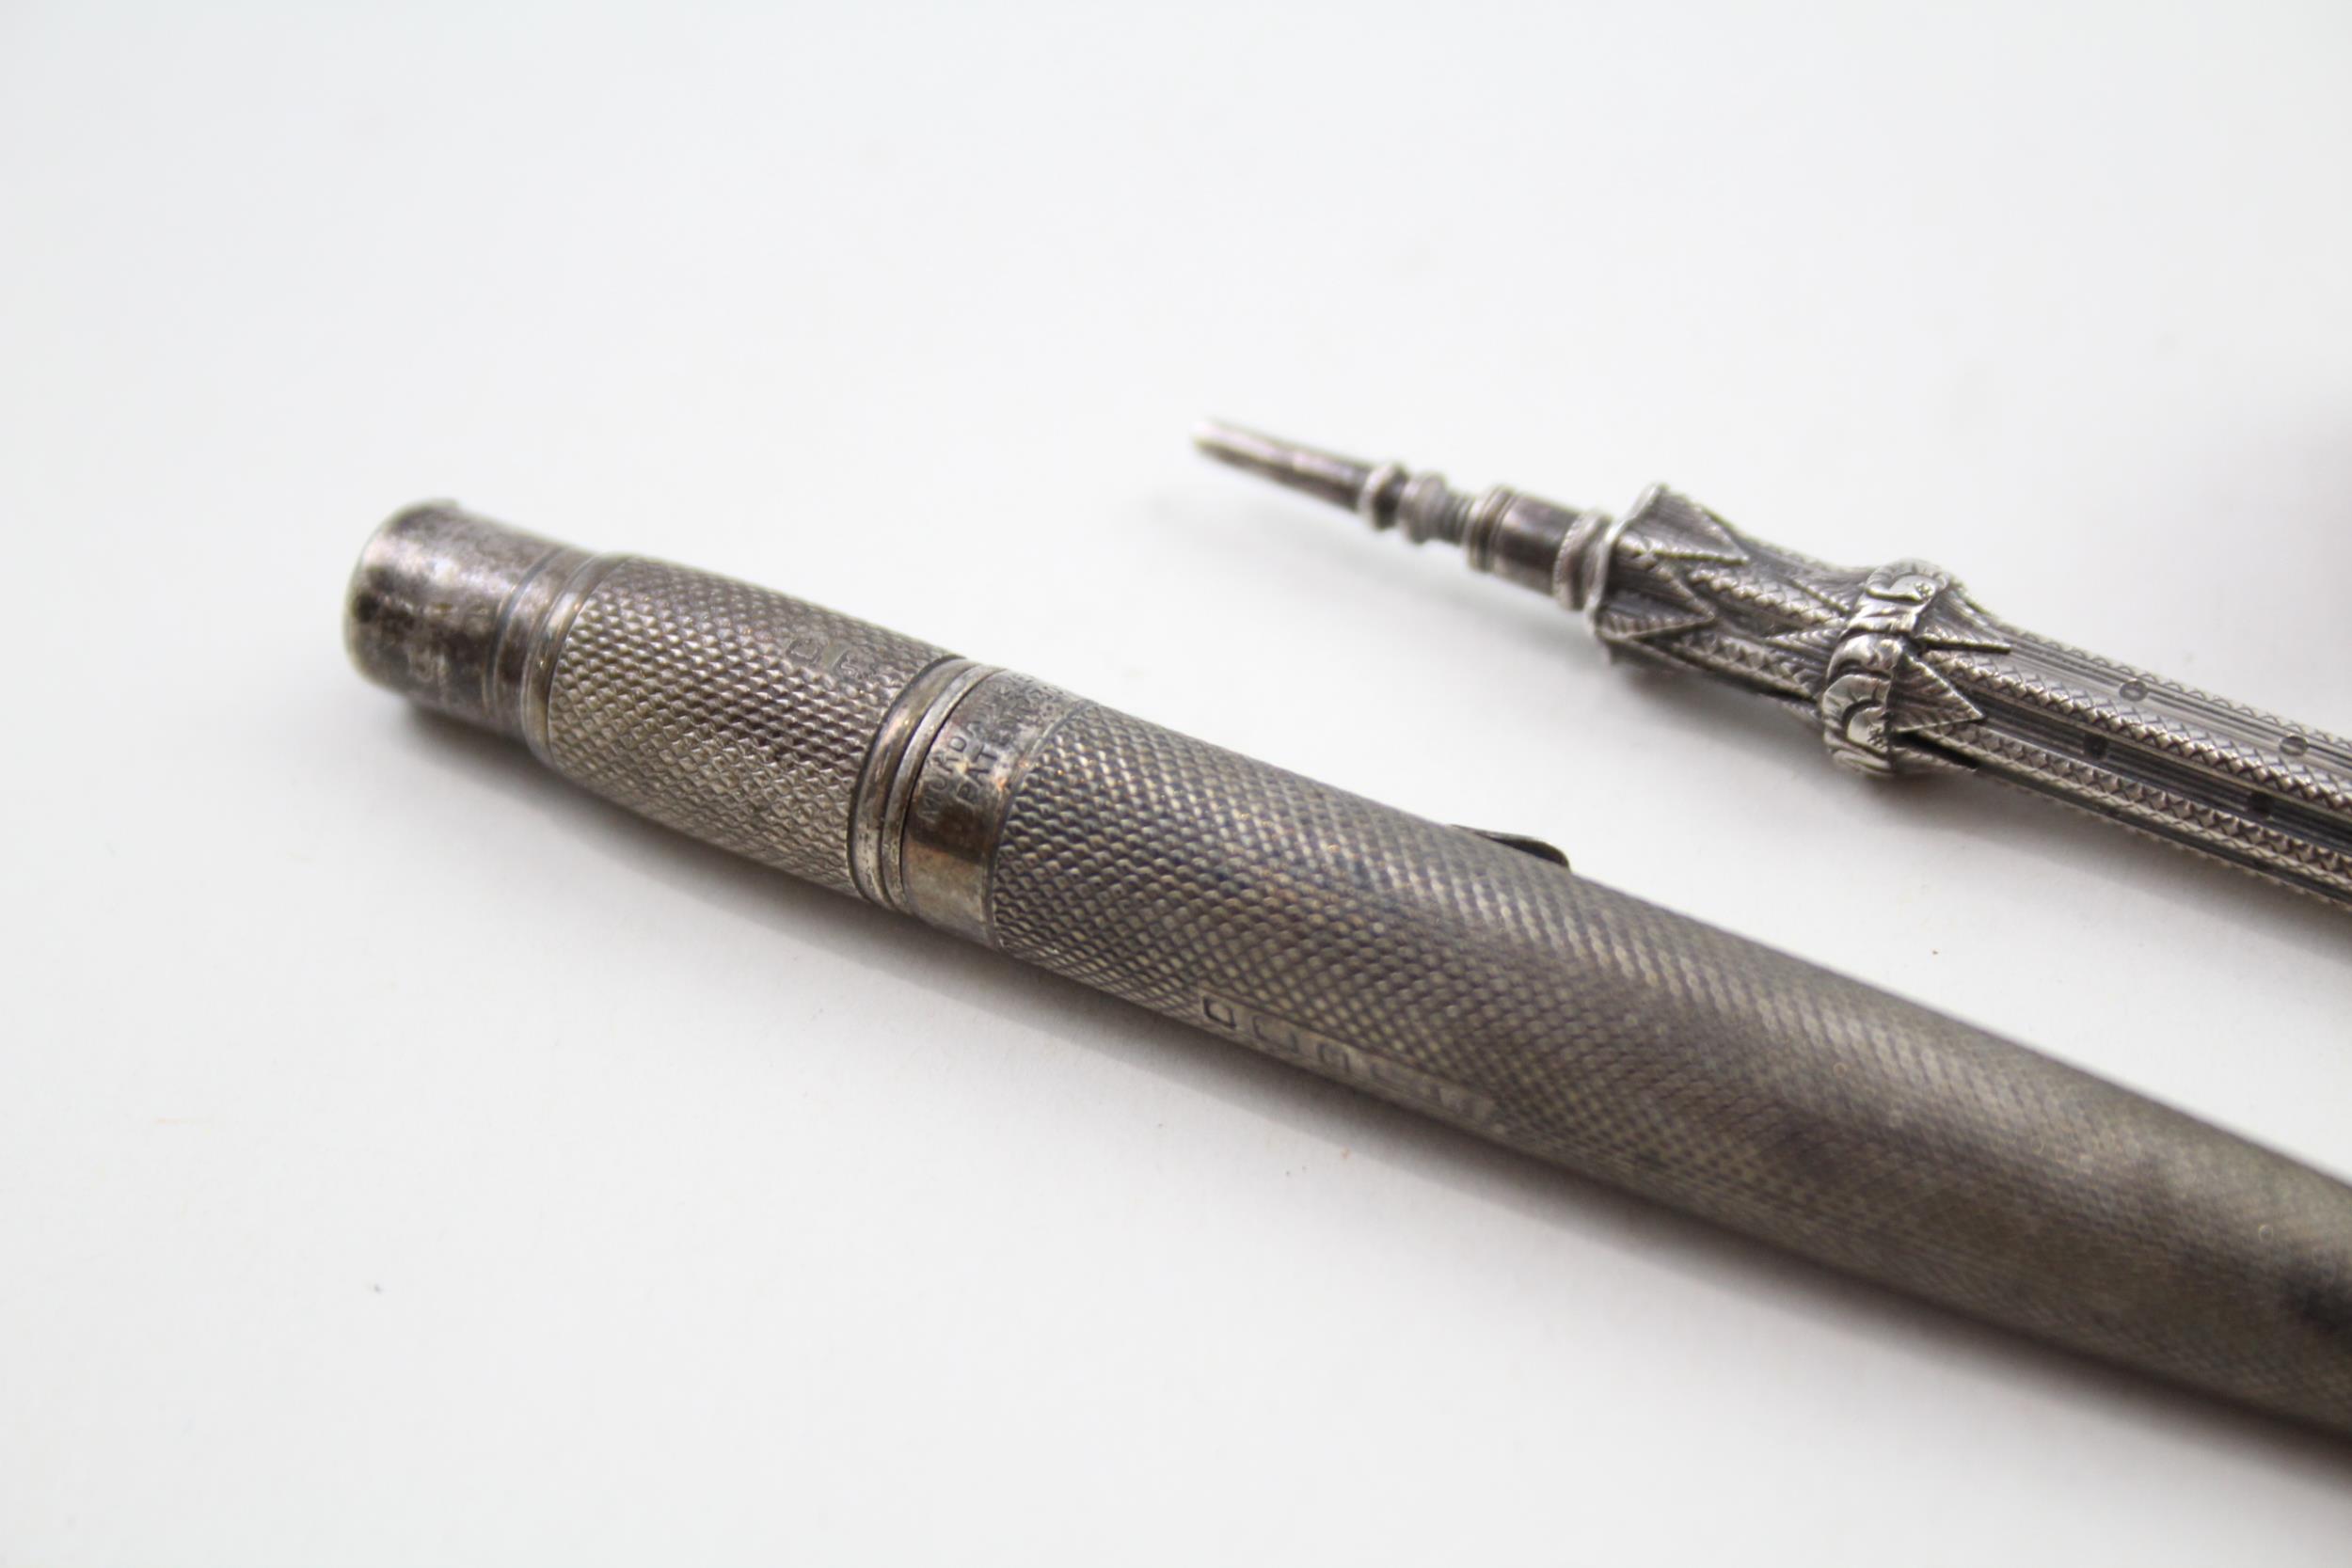 3 x Antique / Vintage .800 & .925 Sterling Silver Pencils & Wax Seal Stamp (70g) - Both Pencils - Image 2 of 7